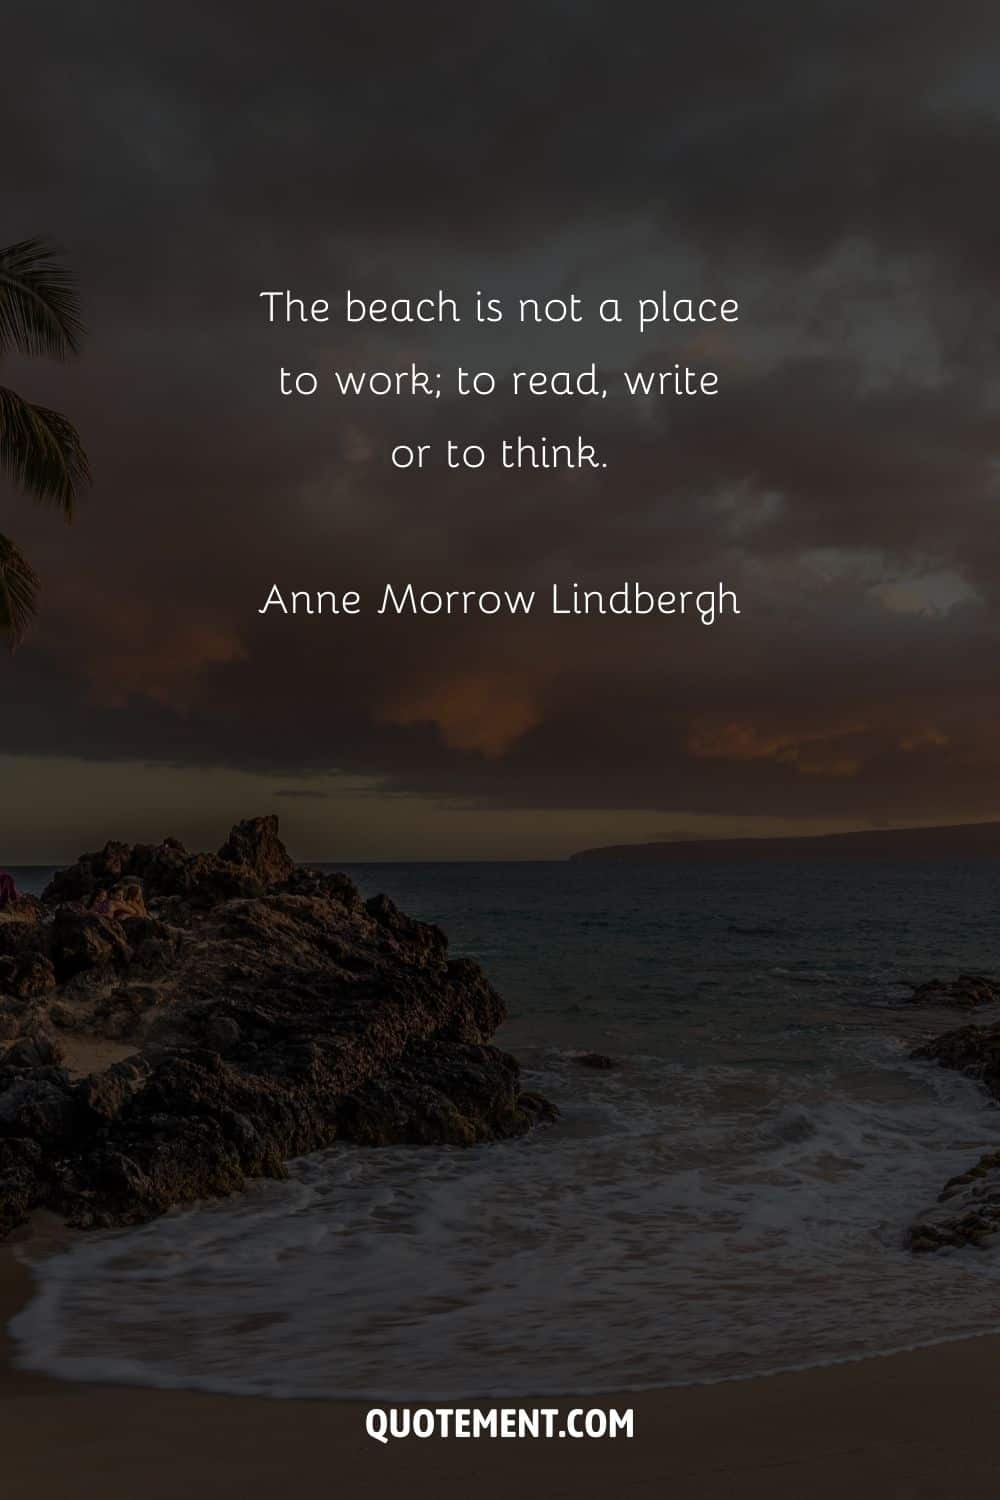 The beach is not a place to work; to read, write or to think. – Anne Morrow Lindbergh